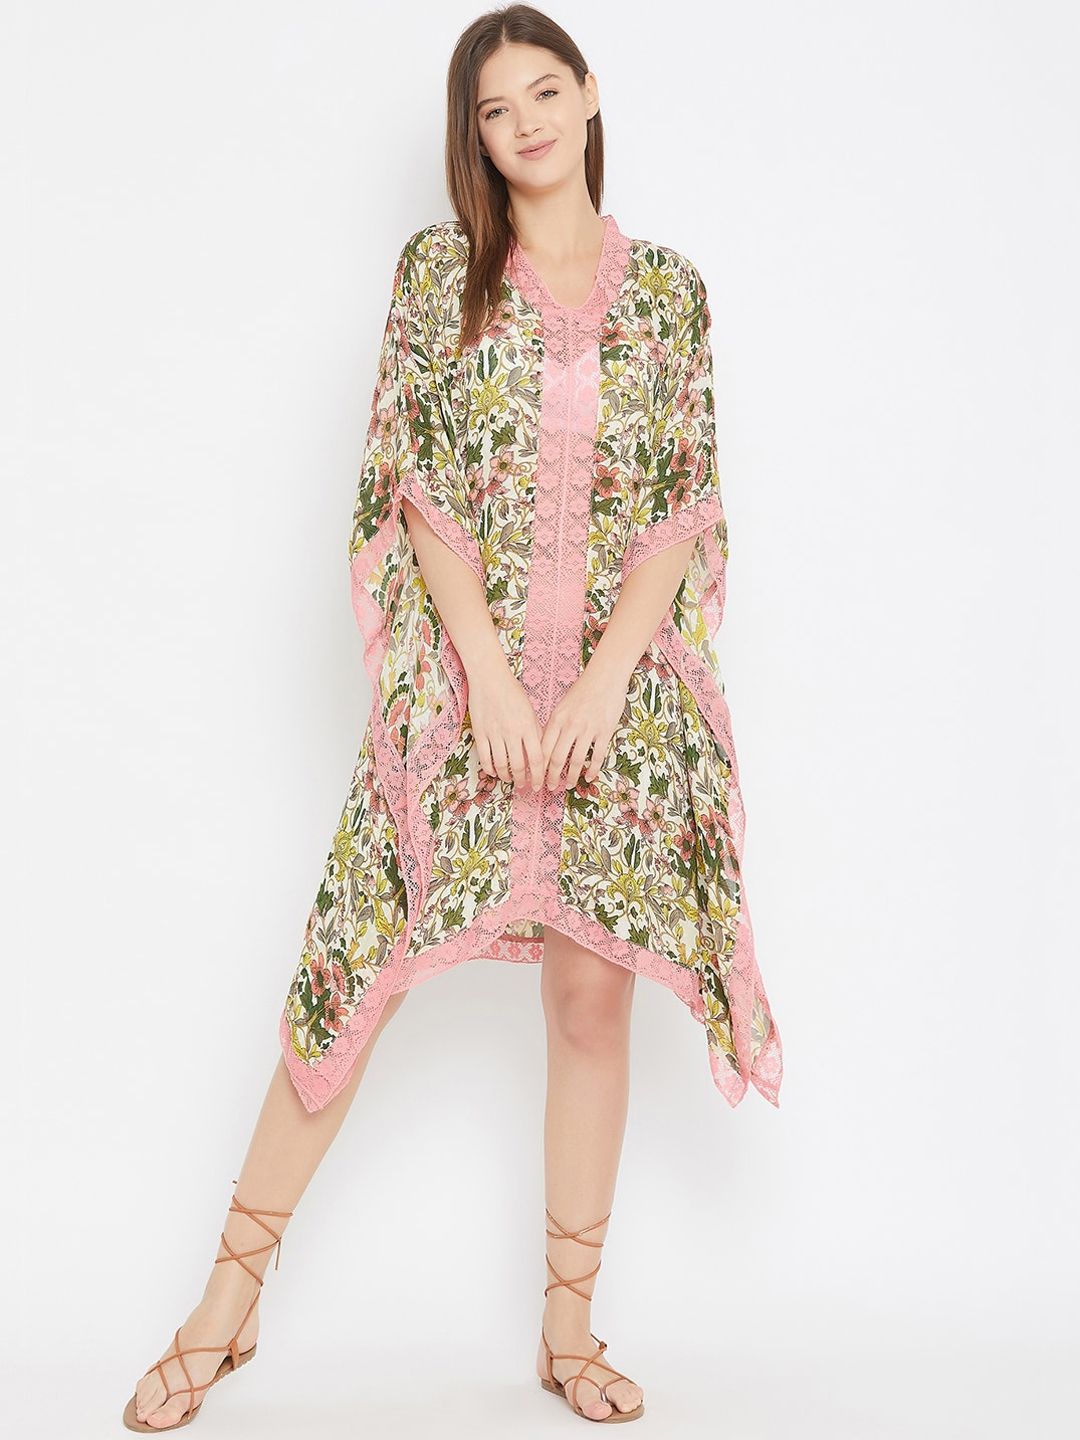 The Kaftan Company Women Cream-Coloured & Green Floral Printed Kaftan Cover-Up Dress Price in India